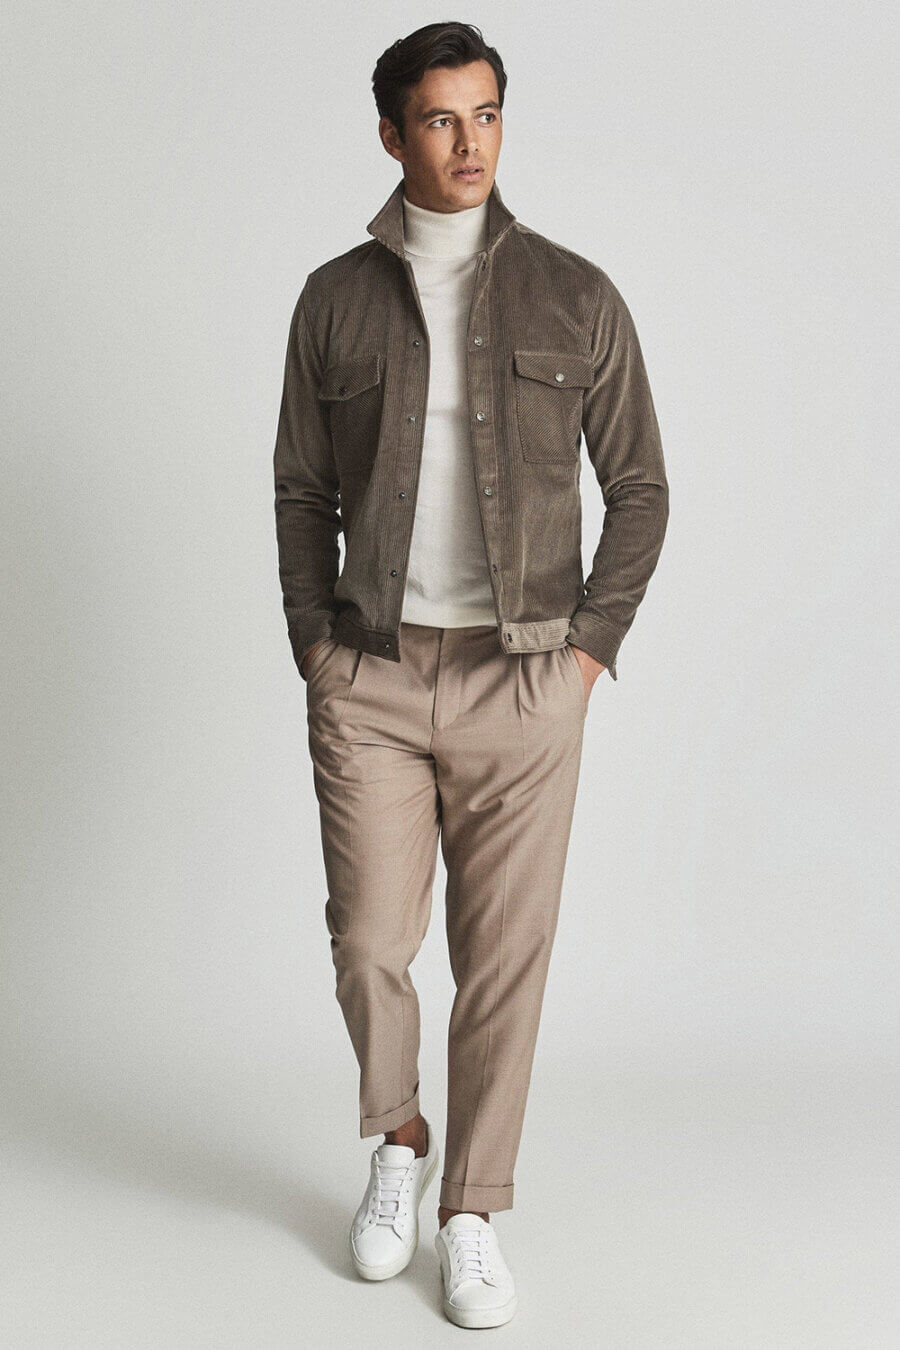 Tonal smart casual khaki pants outfit for men with a turtleneck and suede jacket